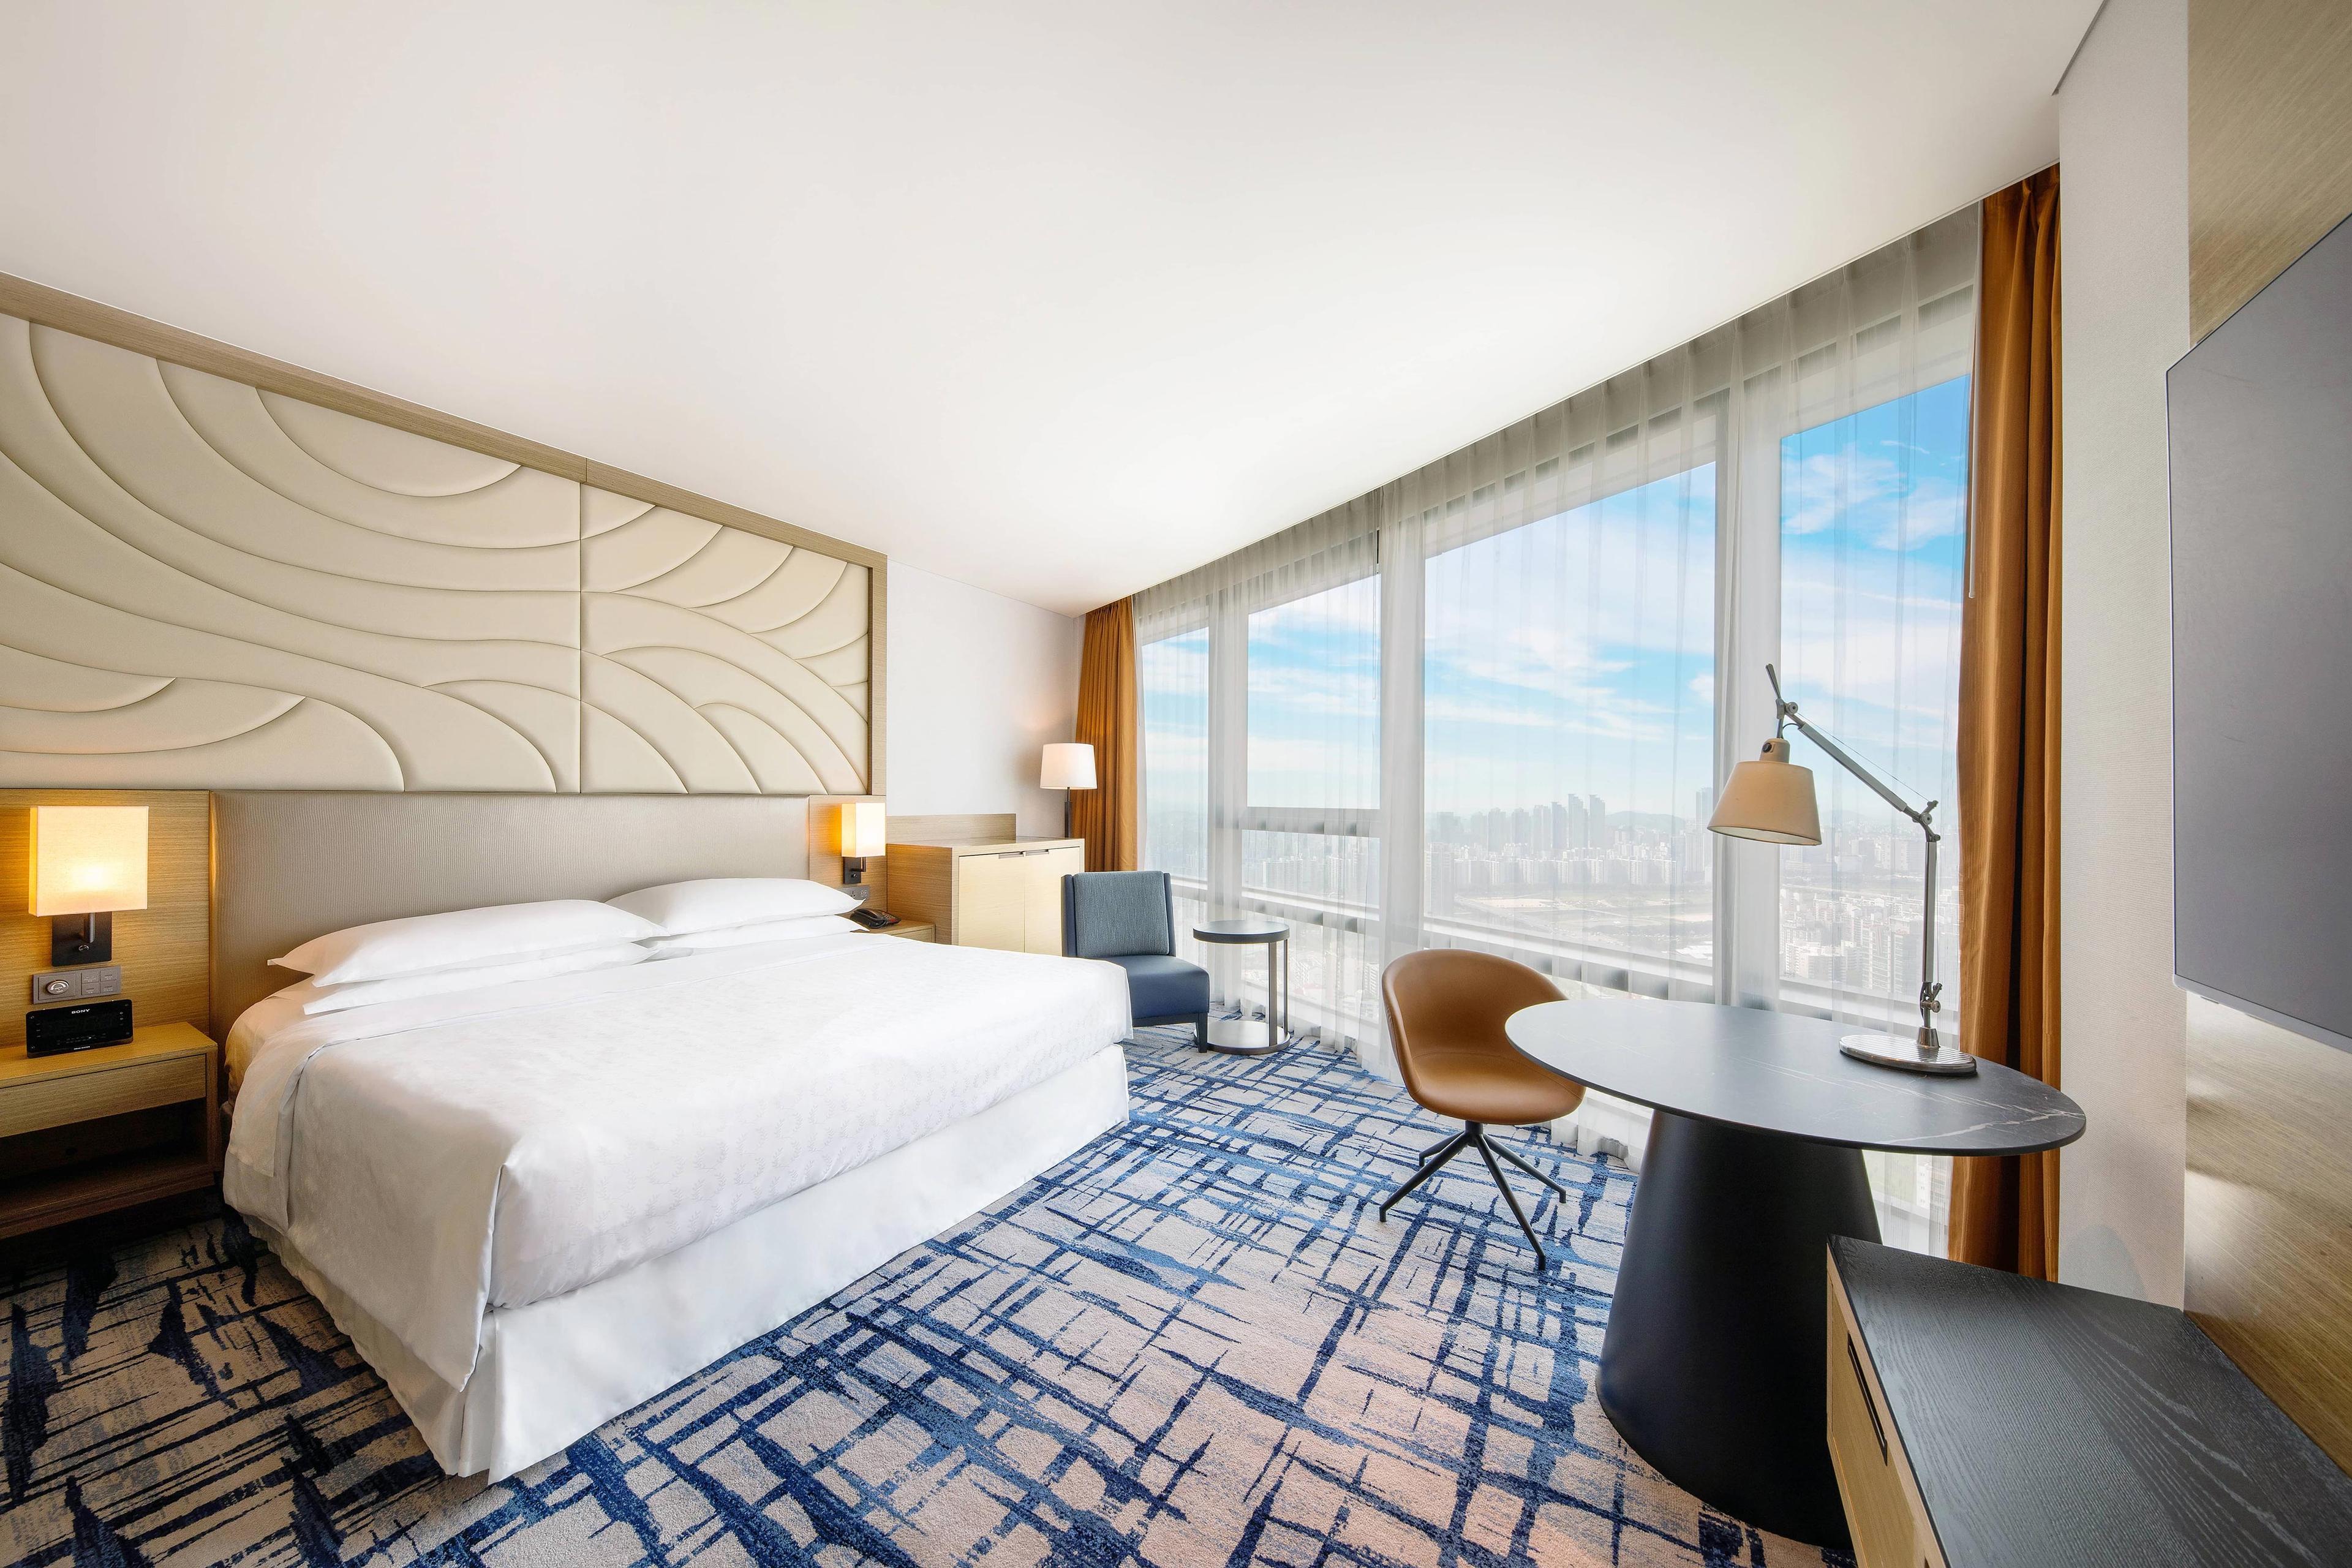 Stay relaxed at spacious guest room with a king-size bed, natural light, smart TV and outstanding view of Seoul.